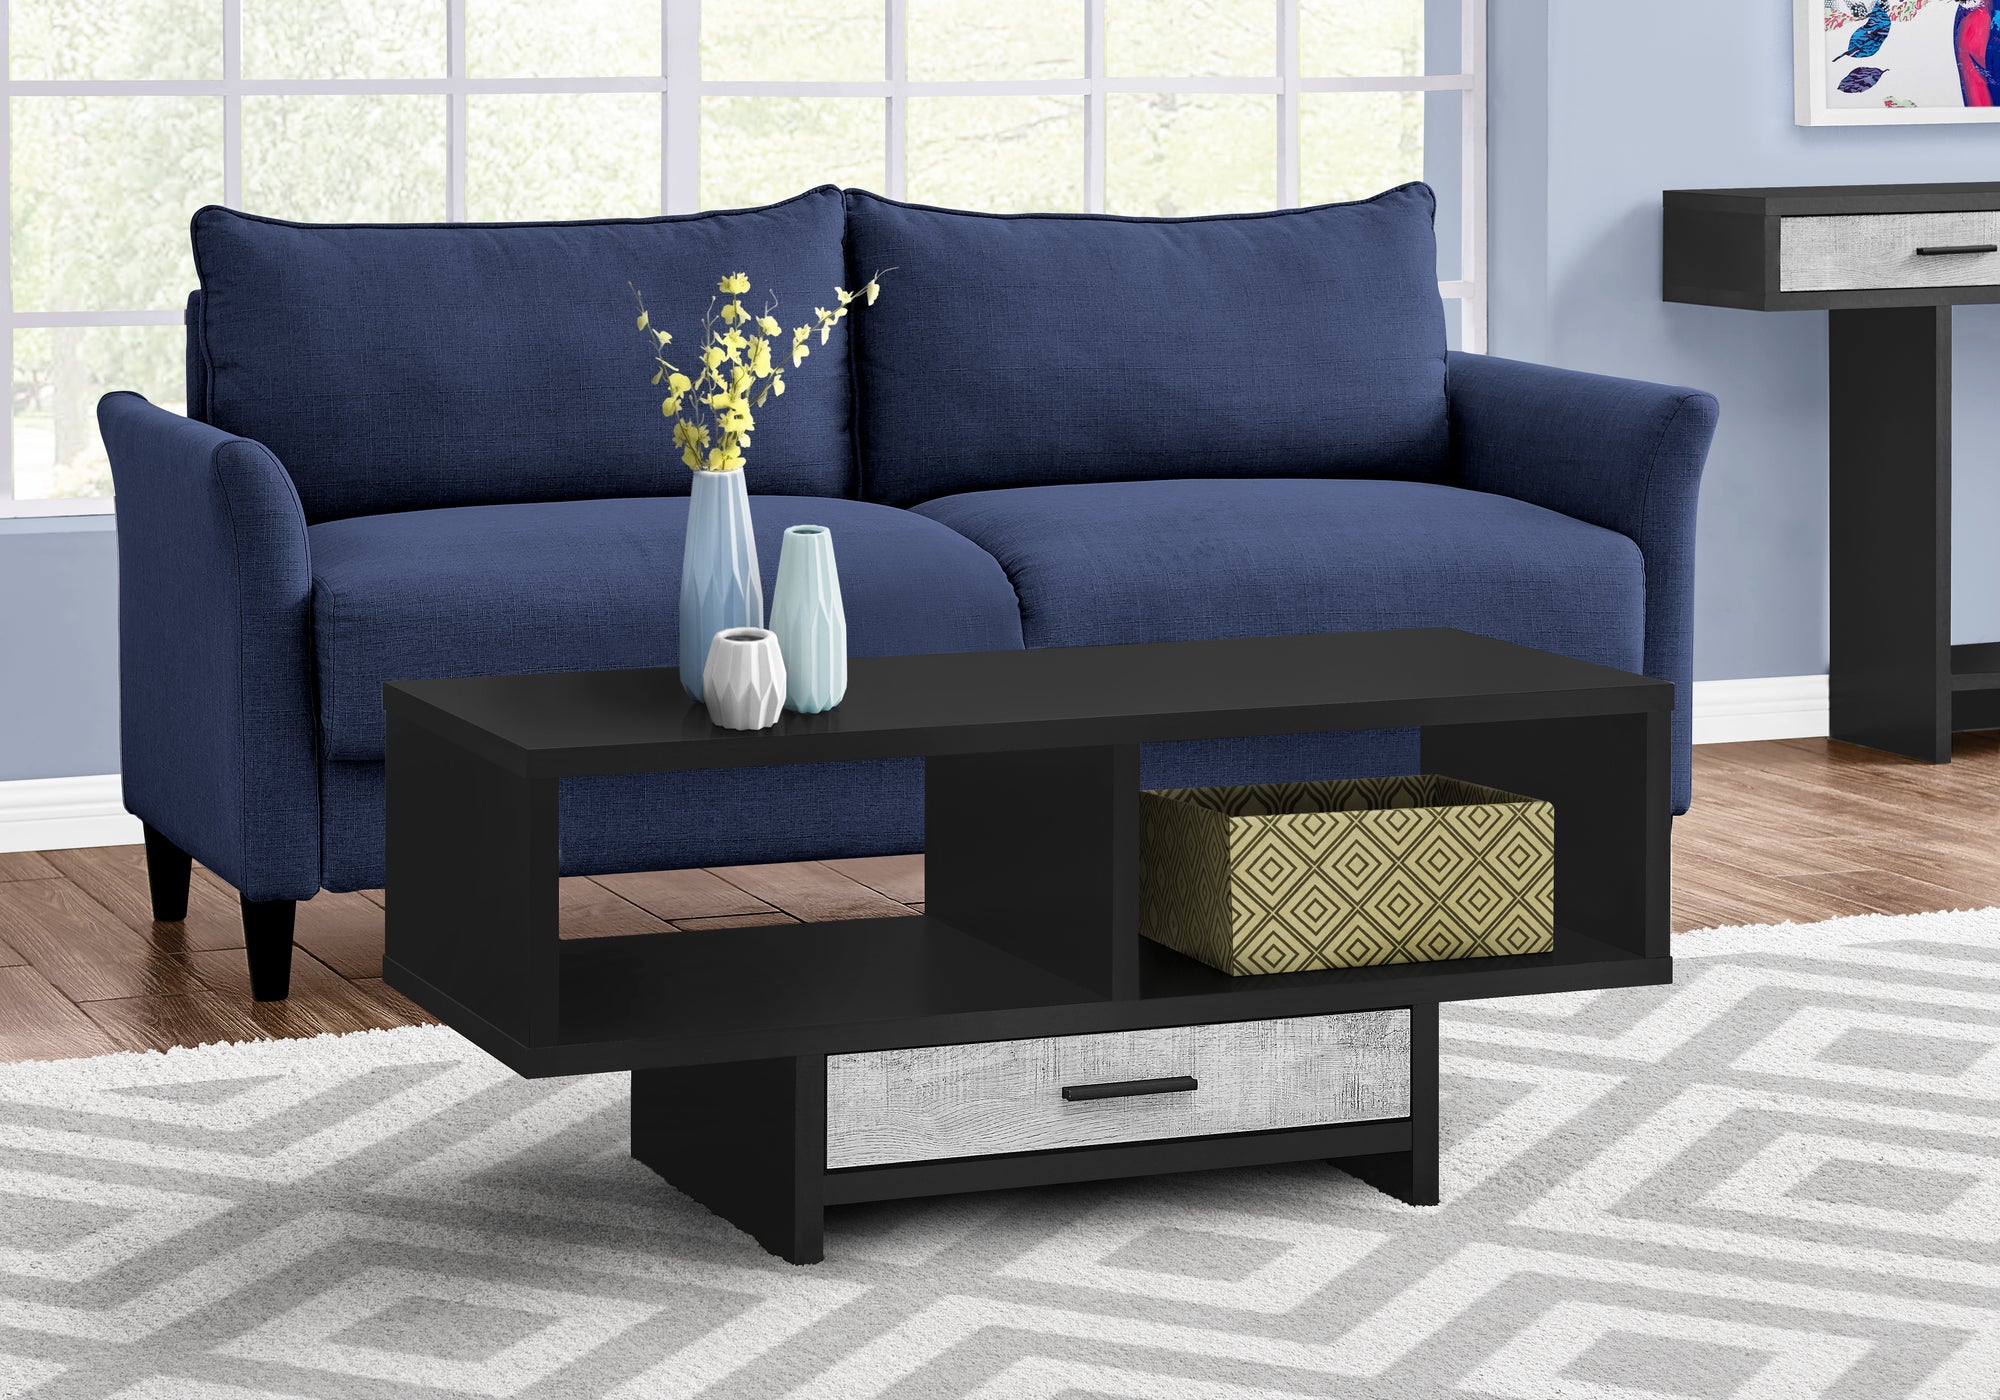 MN-402810    Coffee Table, Accent, Cocktail, Rectangular, Storage, Living Room, Laminate, Black, Grey Reclaimed Wood Look, Contemporary, Modern